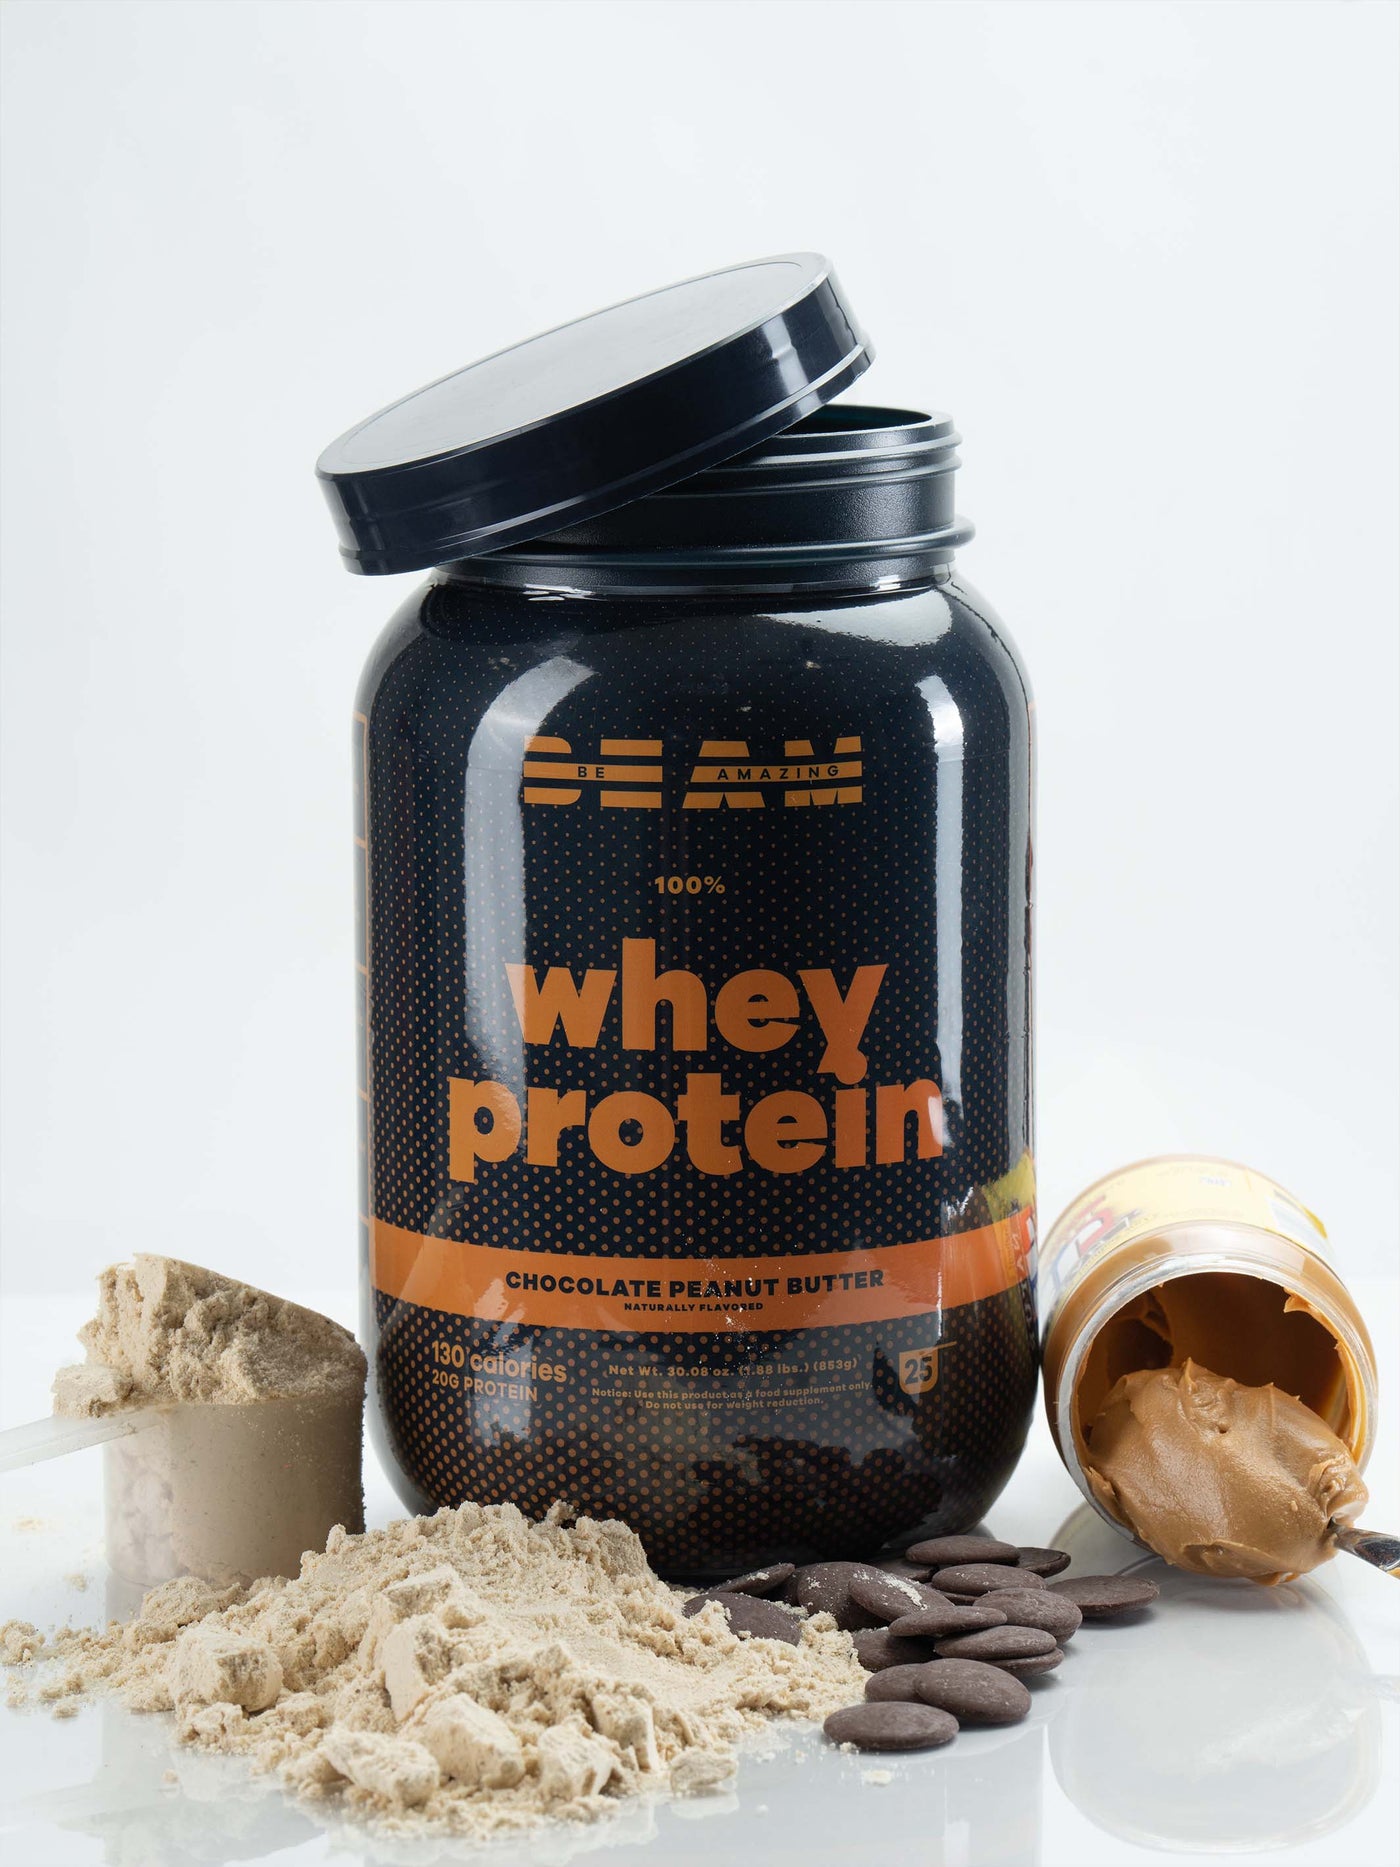 chocolate peanut butter whey protein alternative 2#25 Servings / Chocolate Peanut Butter